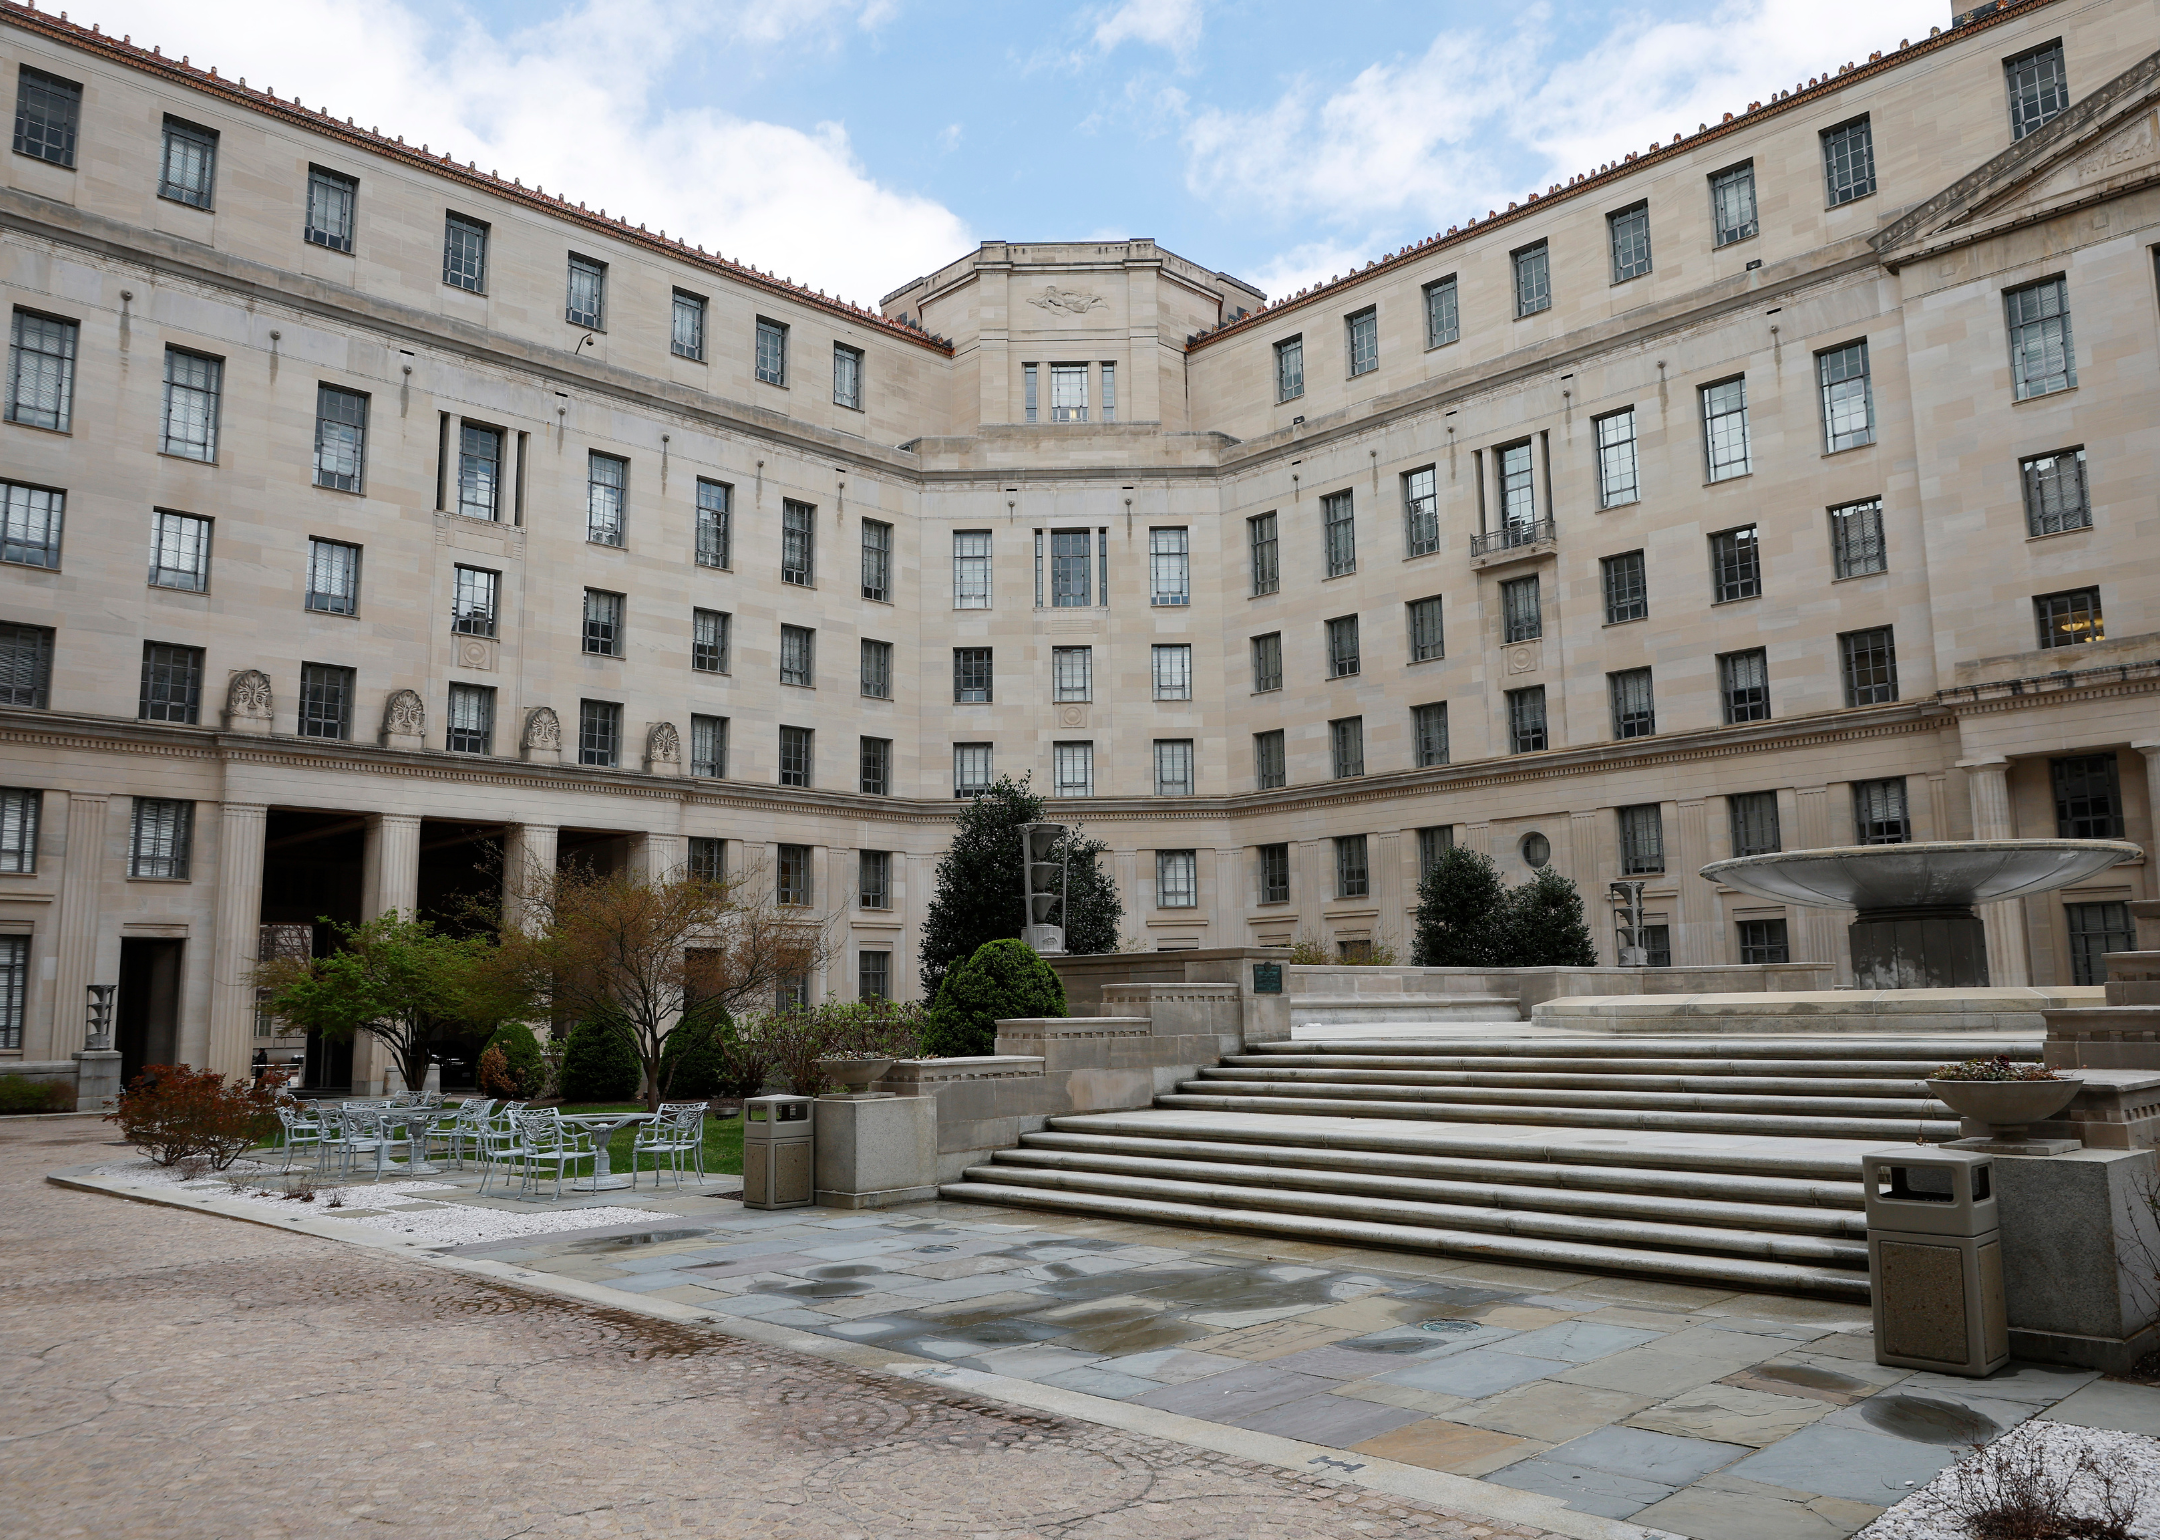 Exterior of the Department of Justice building's courtyard